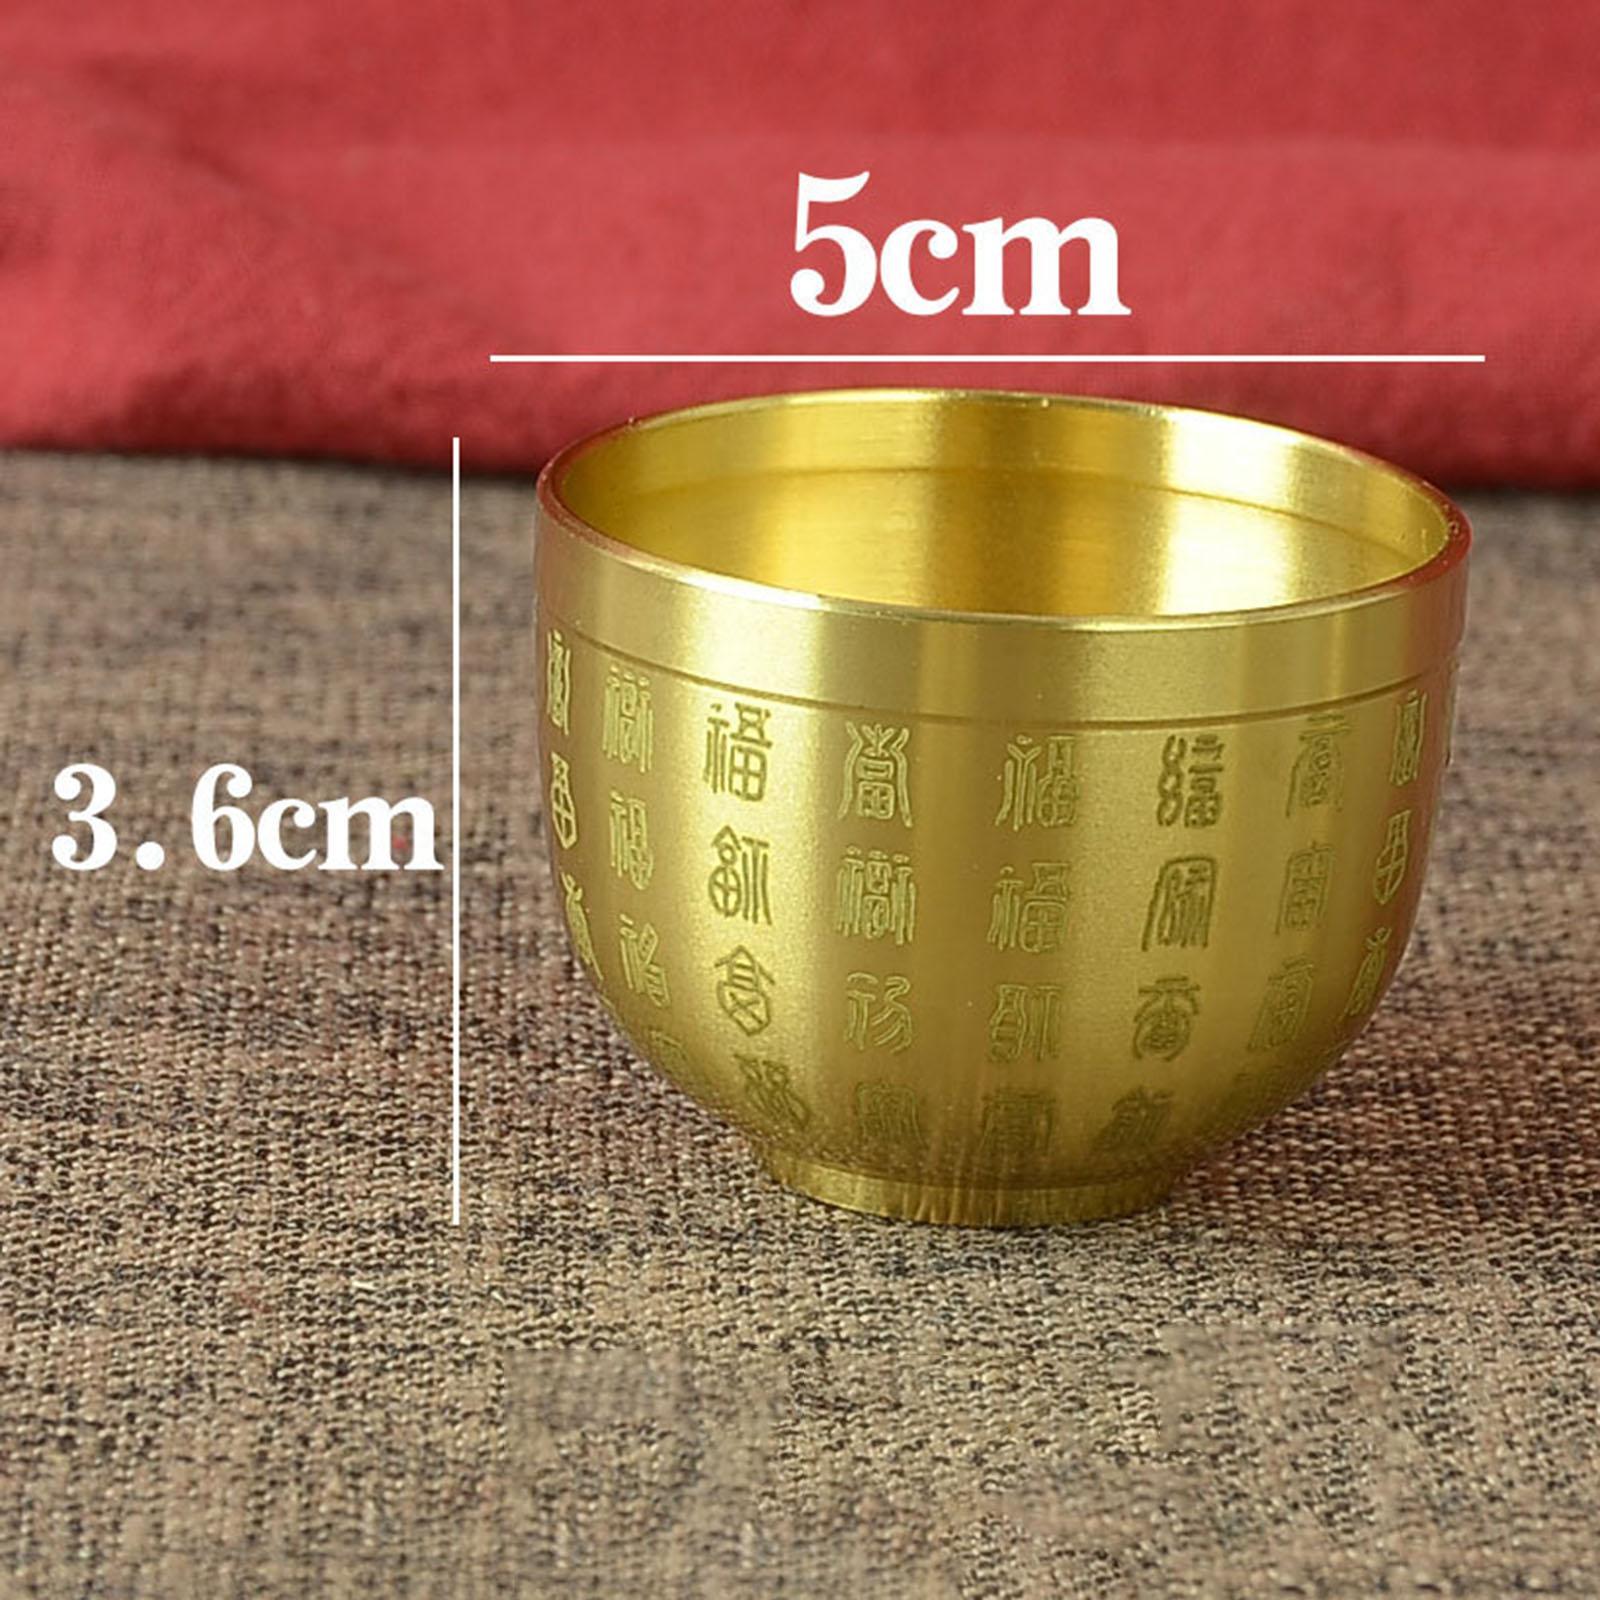 Brass Feng Shui Bowl Chinese Character Chinese Traditional Folk for Wealth